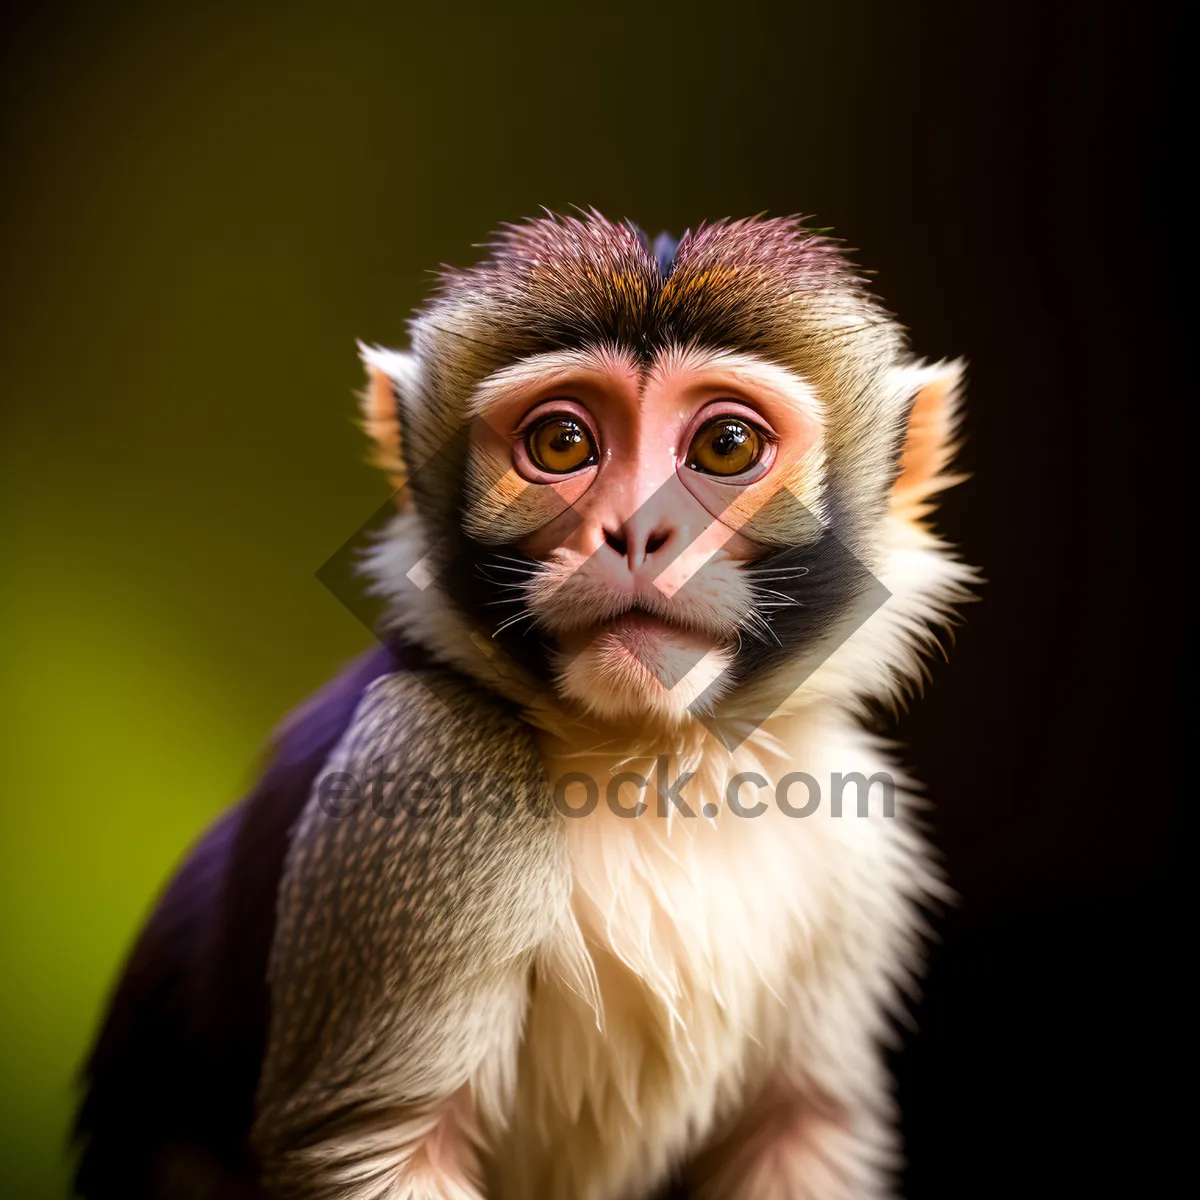 Picture of Adorable baby monkey with curious face